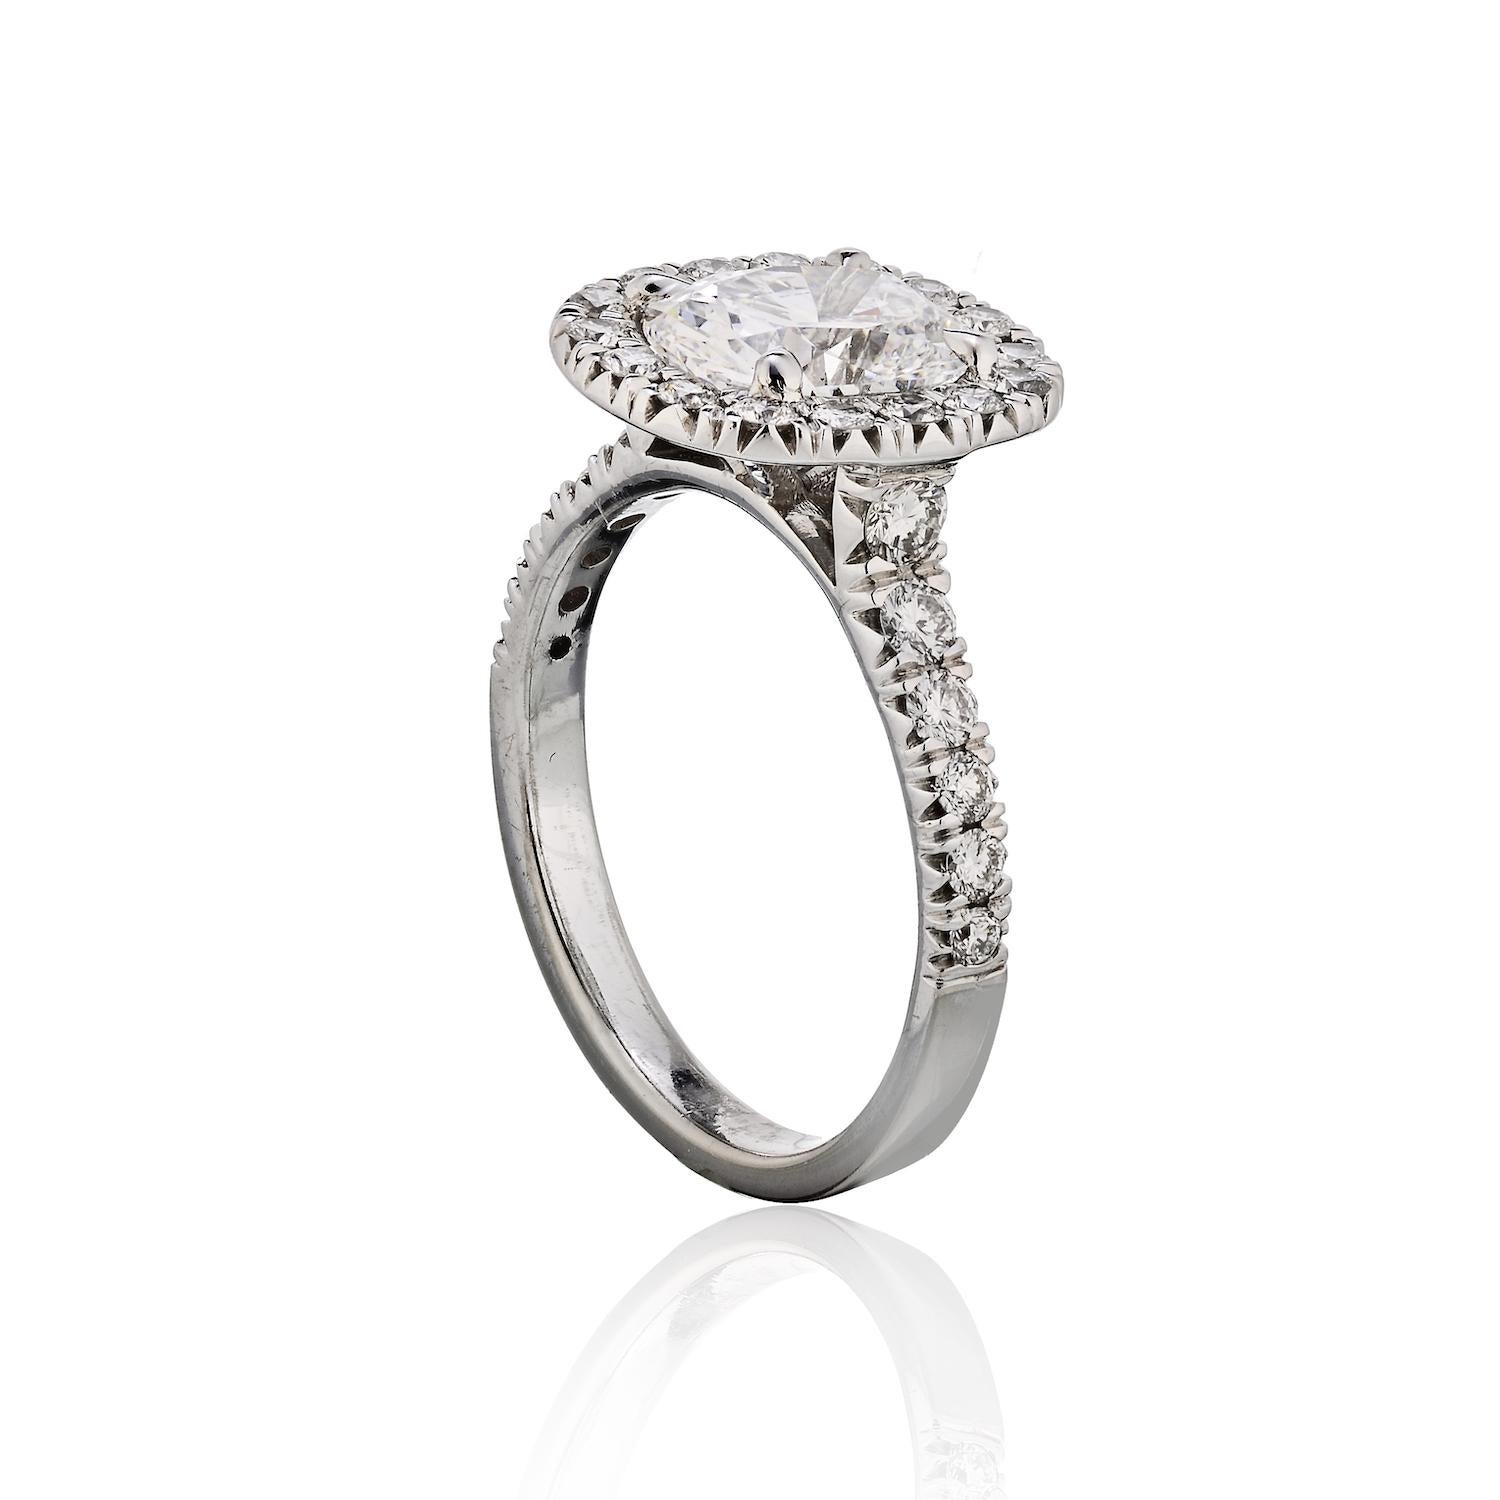 Ladies white gold cushion cut diamond Halo-set ring featuring a 1.82 Carat Cushion cut Diamond of (D color and SI1 clarity. Also set with (42) Round Brilliant cut diamonds weighing approximately 0.50 carat total weight. 
Ring size 7. 

Very Good